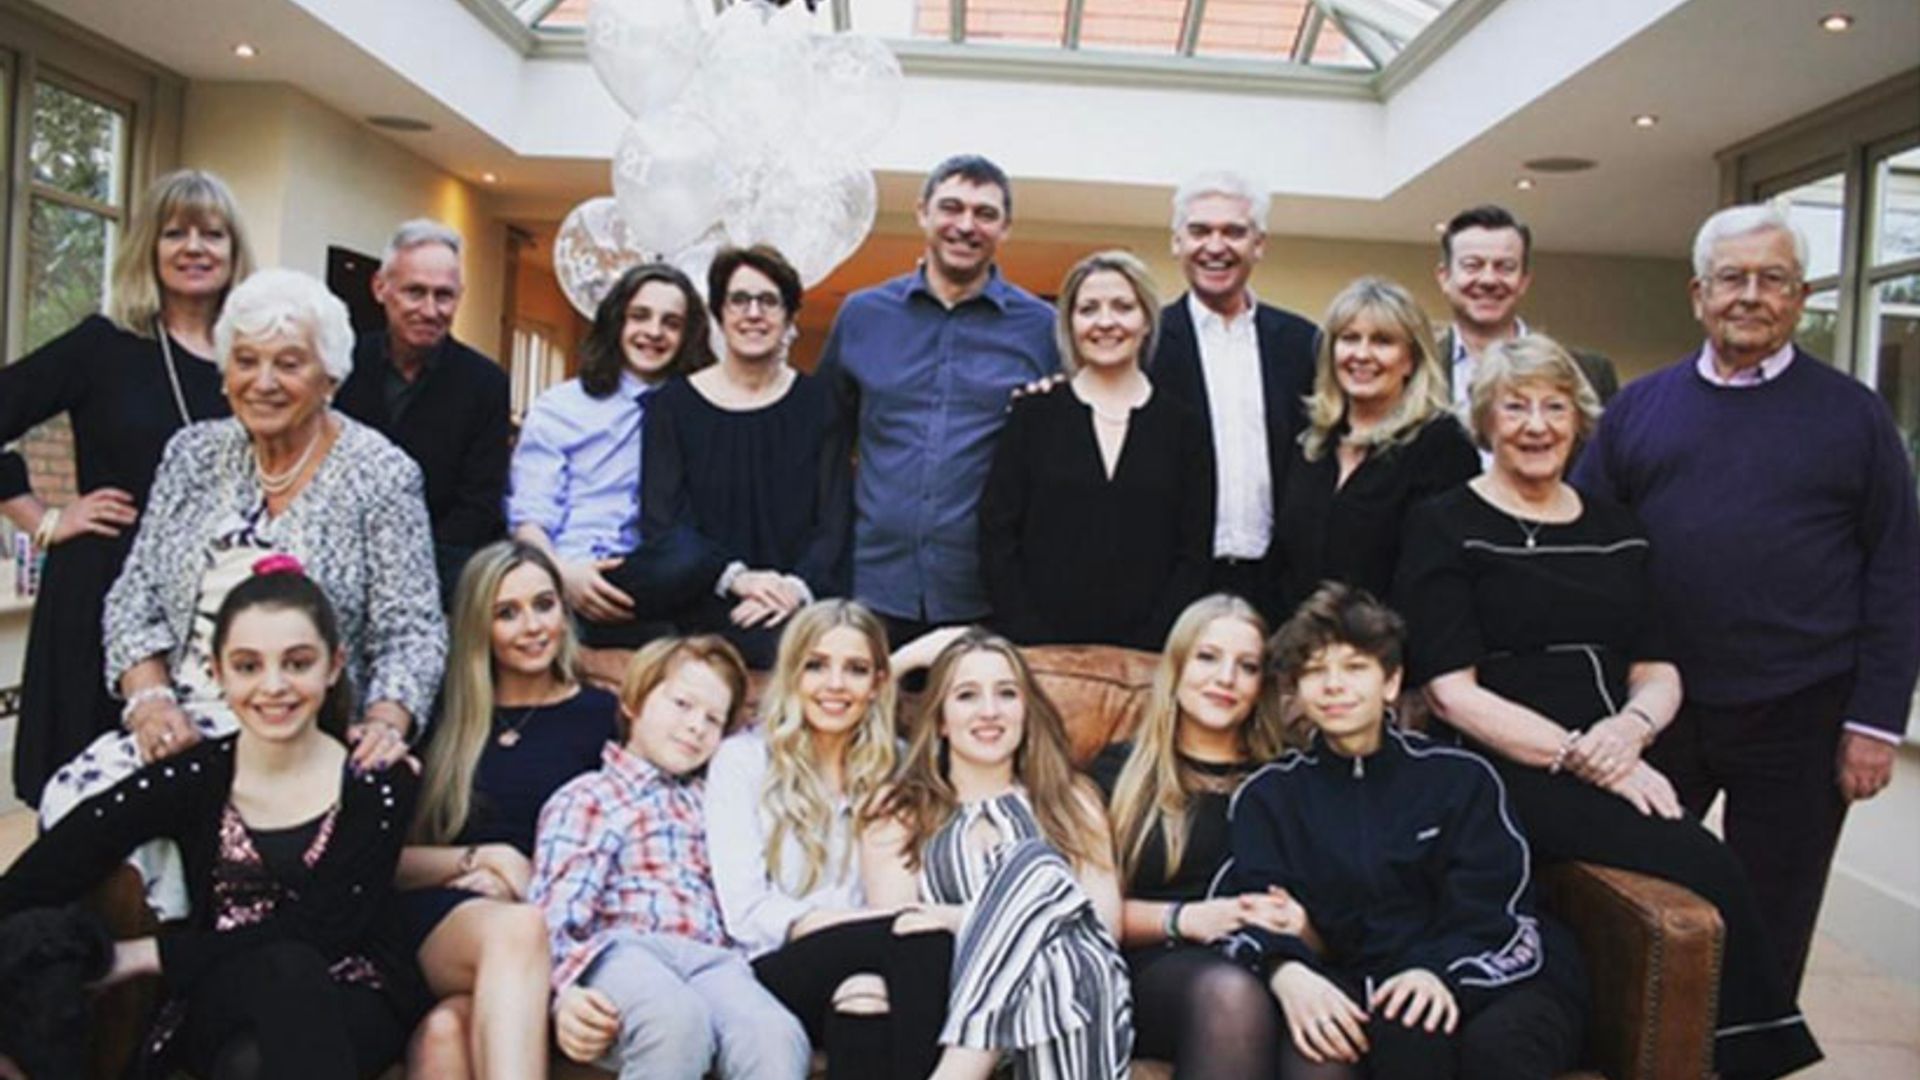 Phillip Schofield shares family photo as daughter celebrates 21st